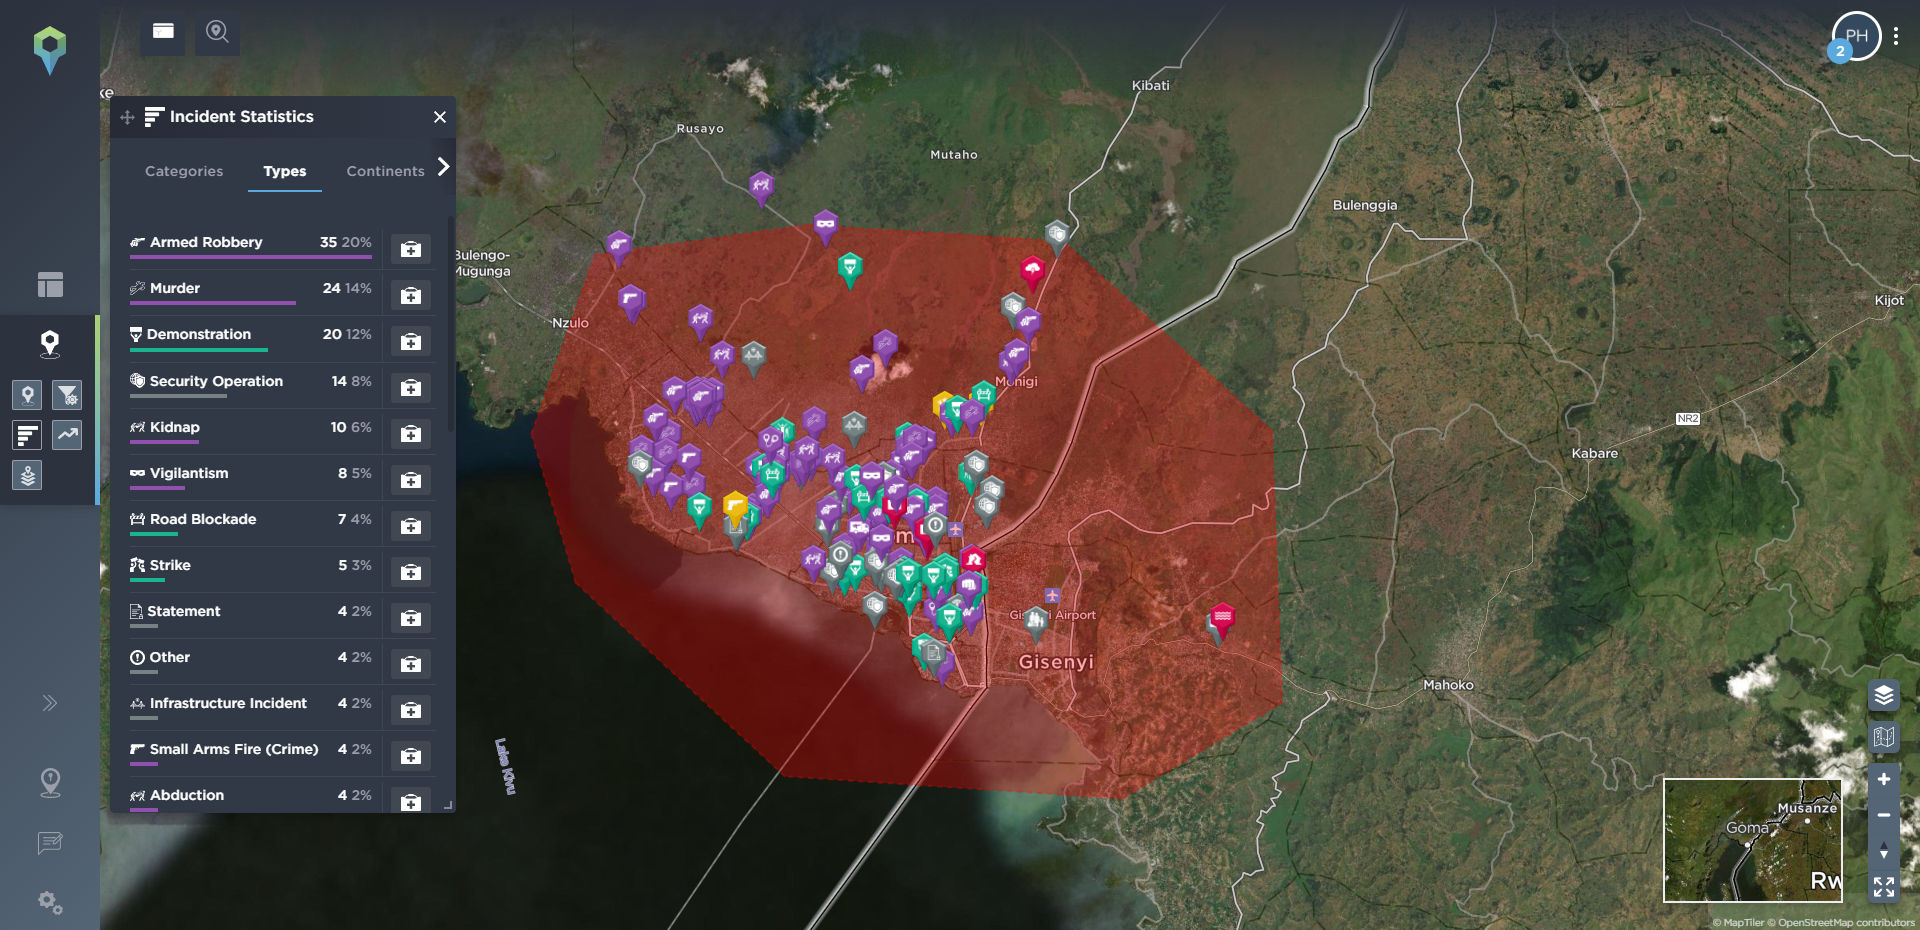 Tracking armed conflict Democratic Republic of Congo route threat assessment using threat intelligence software